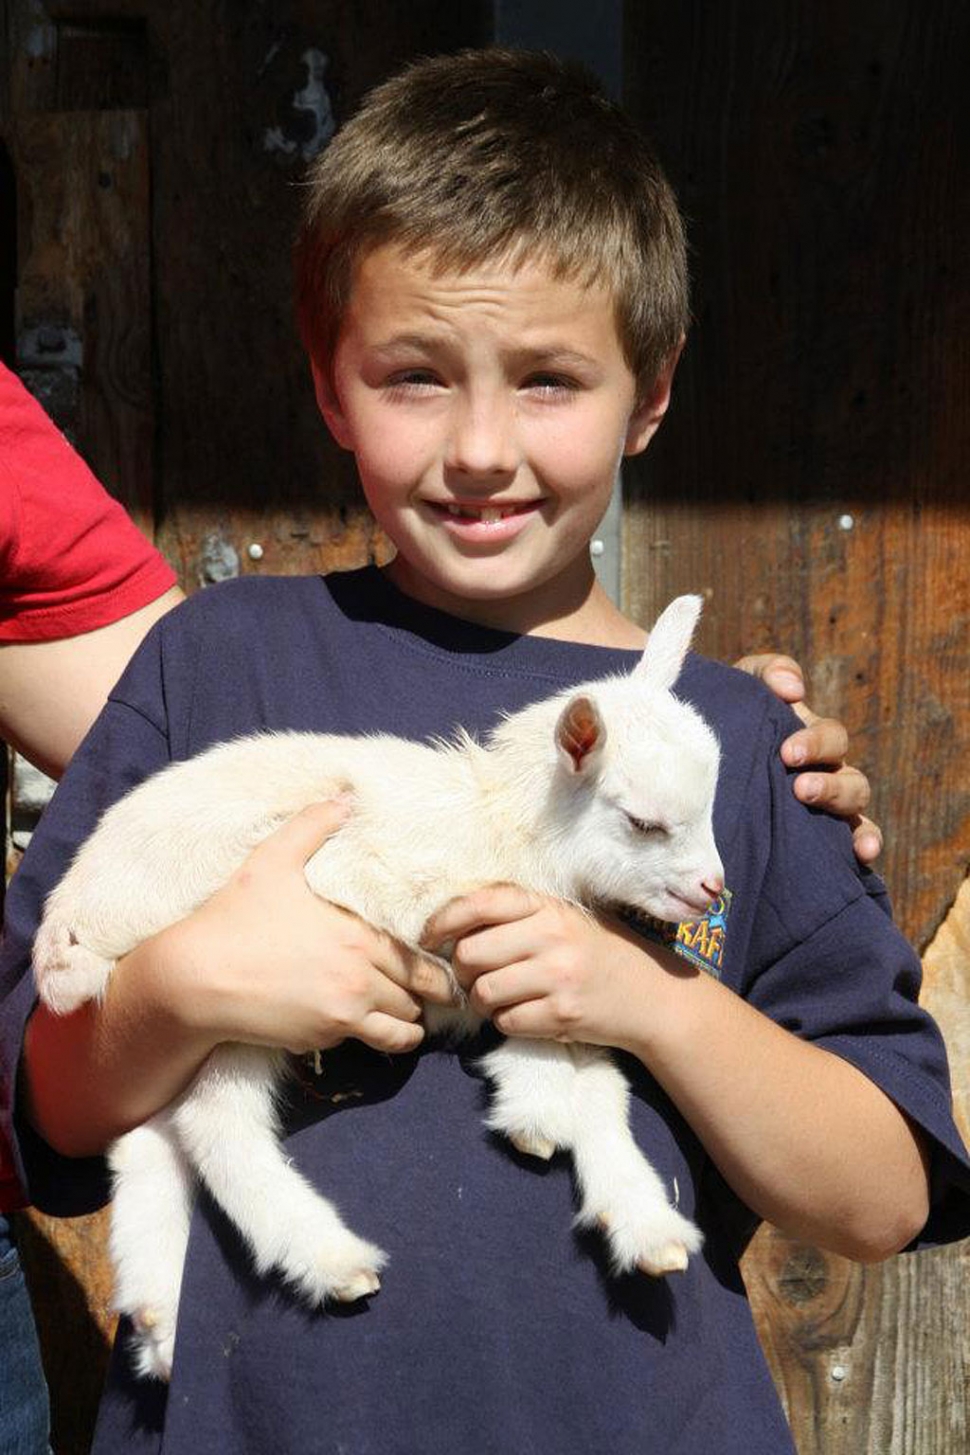 10 year old Austin Ingis of Piru. He is with Santa Clara Valley Grange. Austin’s goat had a baby at the Santa Barbara Fair & Expo. In honor of the Fair’s theme (“FAIR-y Tails come true”) Austin named the baby goat “Princess Peach”.